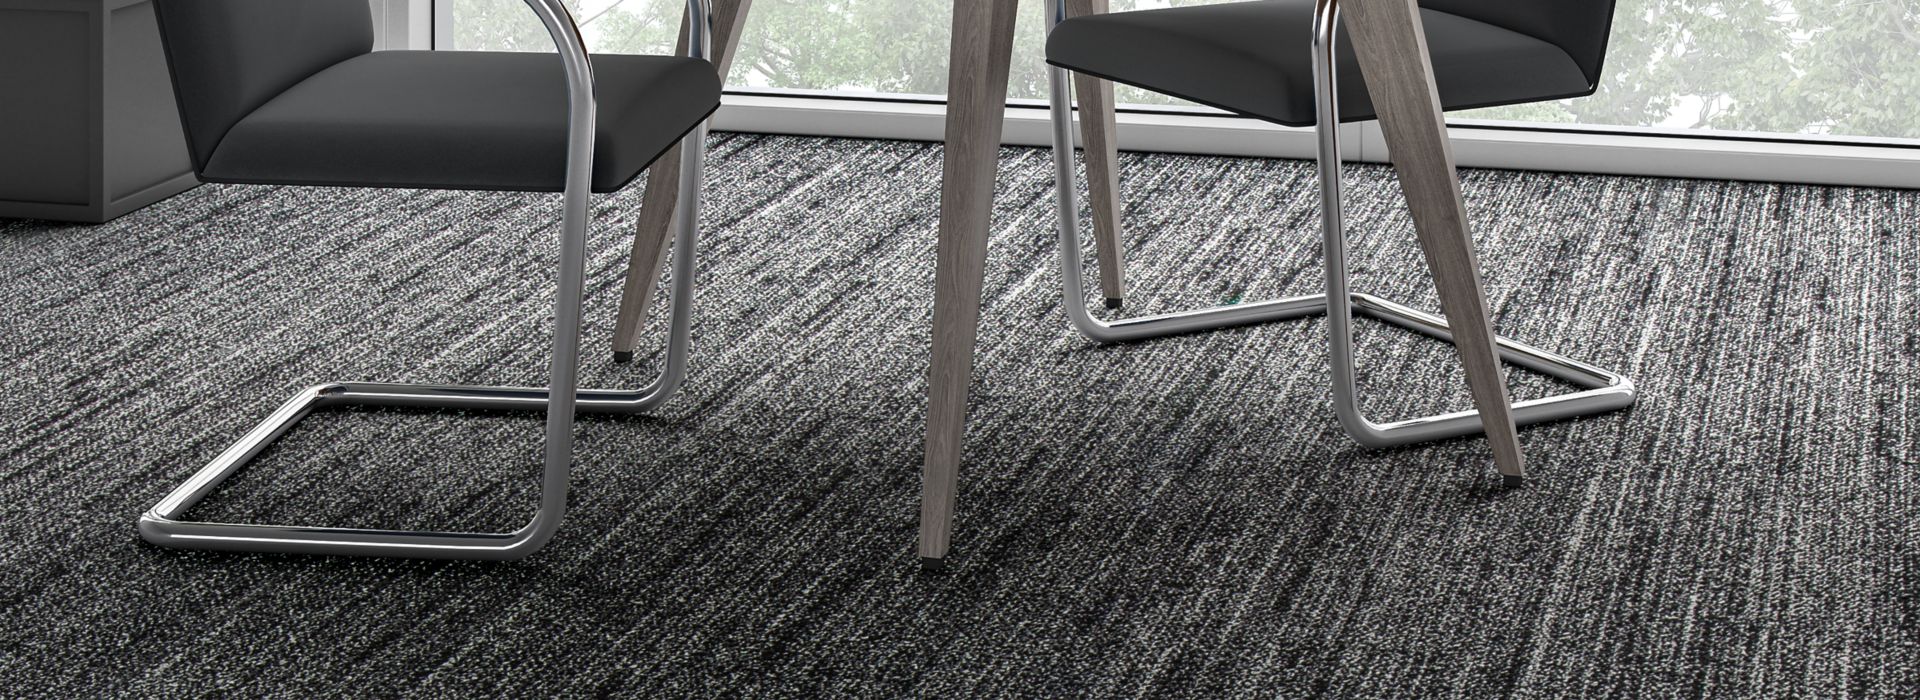 Interface WW870 plank carpet tile shown with small table and chairs numéro d’image 1